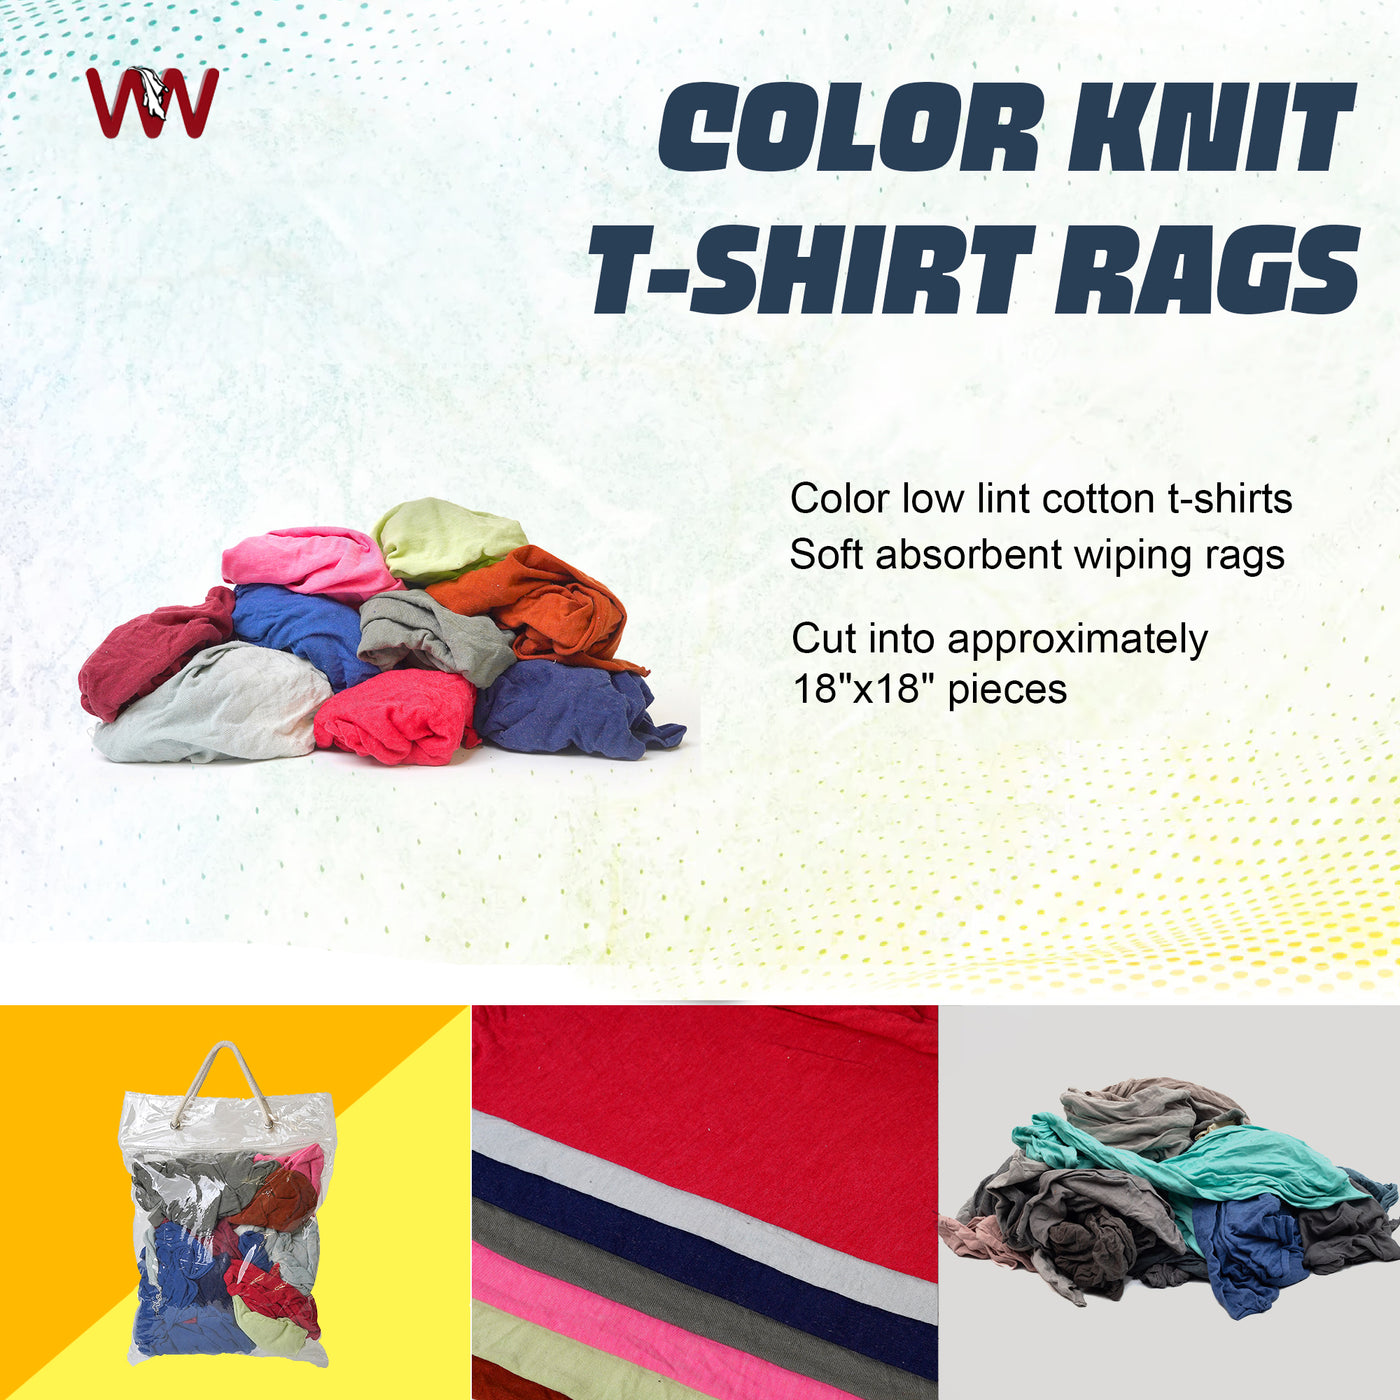 Supremeplus New Color Knit T-Shirt Cotton Cleaning Rags 600 lbs. Bags Pallet- Multipurpose Cleaning 60x10 Bags (600 lbs.)